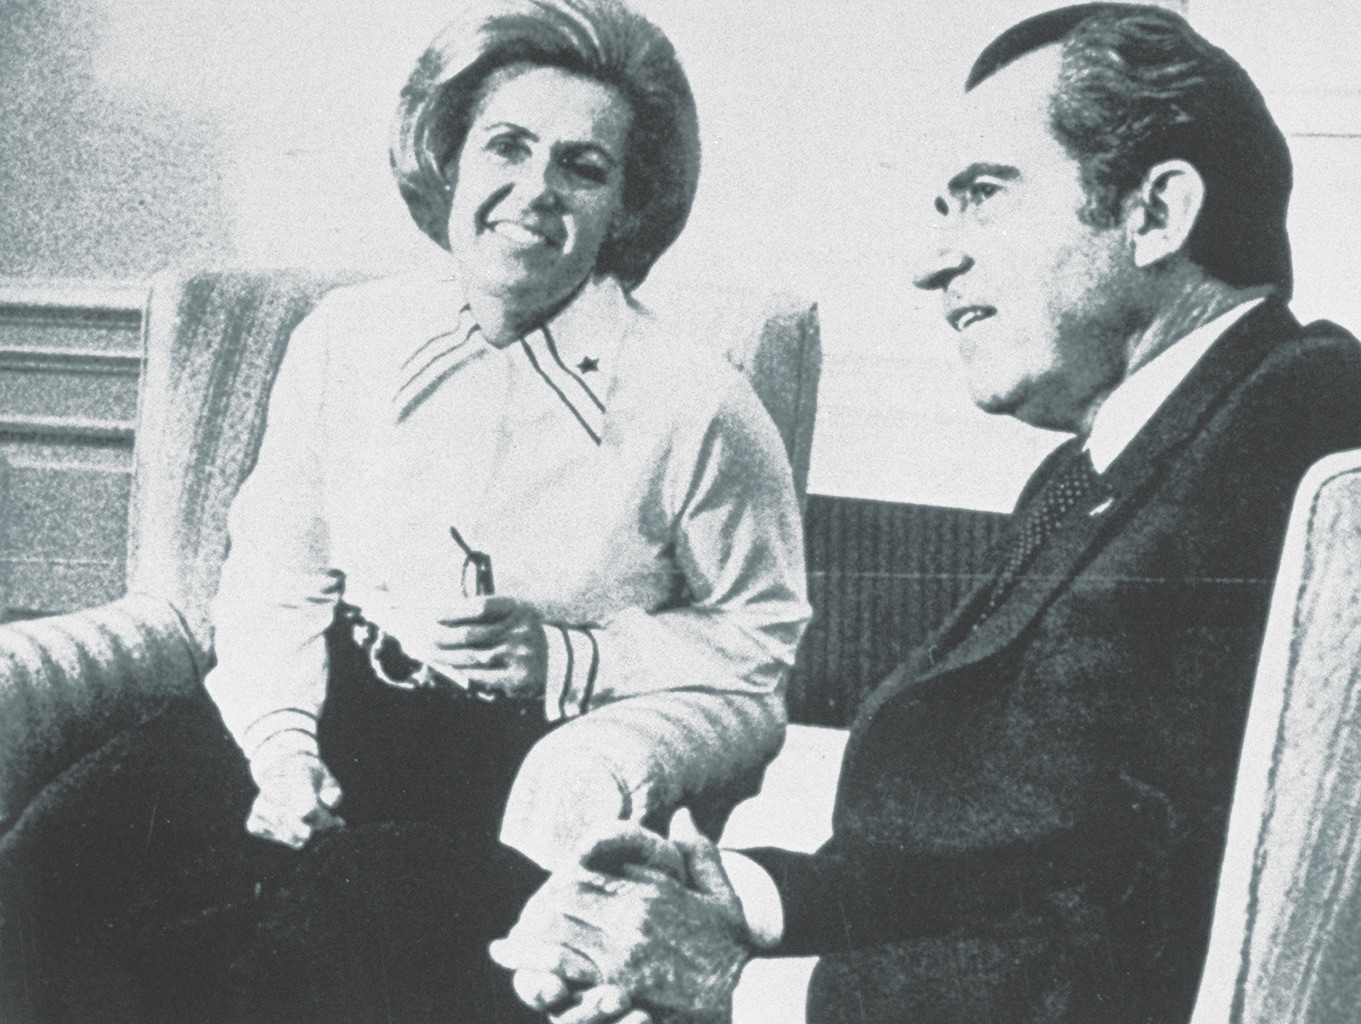 Sybil Stockdale, the leader of the POW wives, shown with President Richard Nixon in 1972, continually pressured the administration to make POWs a priority. (Kim Komenich/The Life Images Collection via Getty Images)